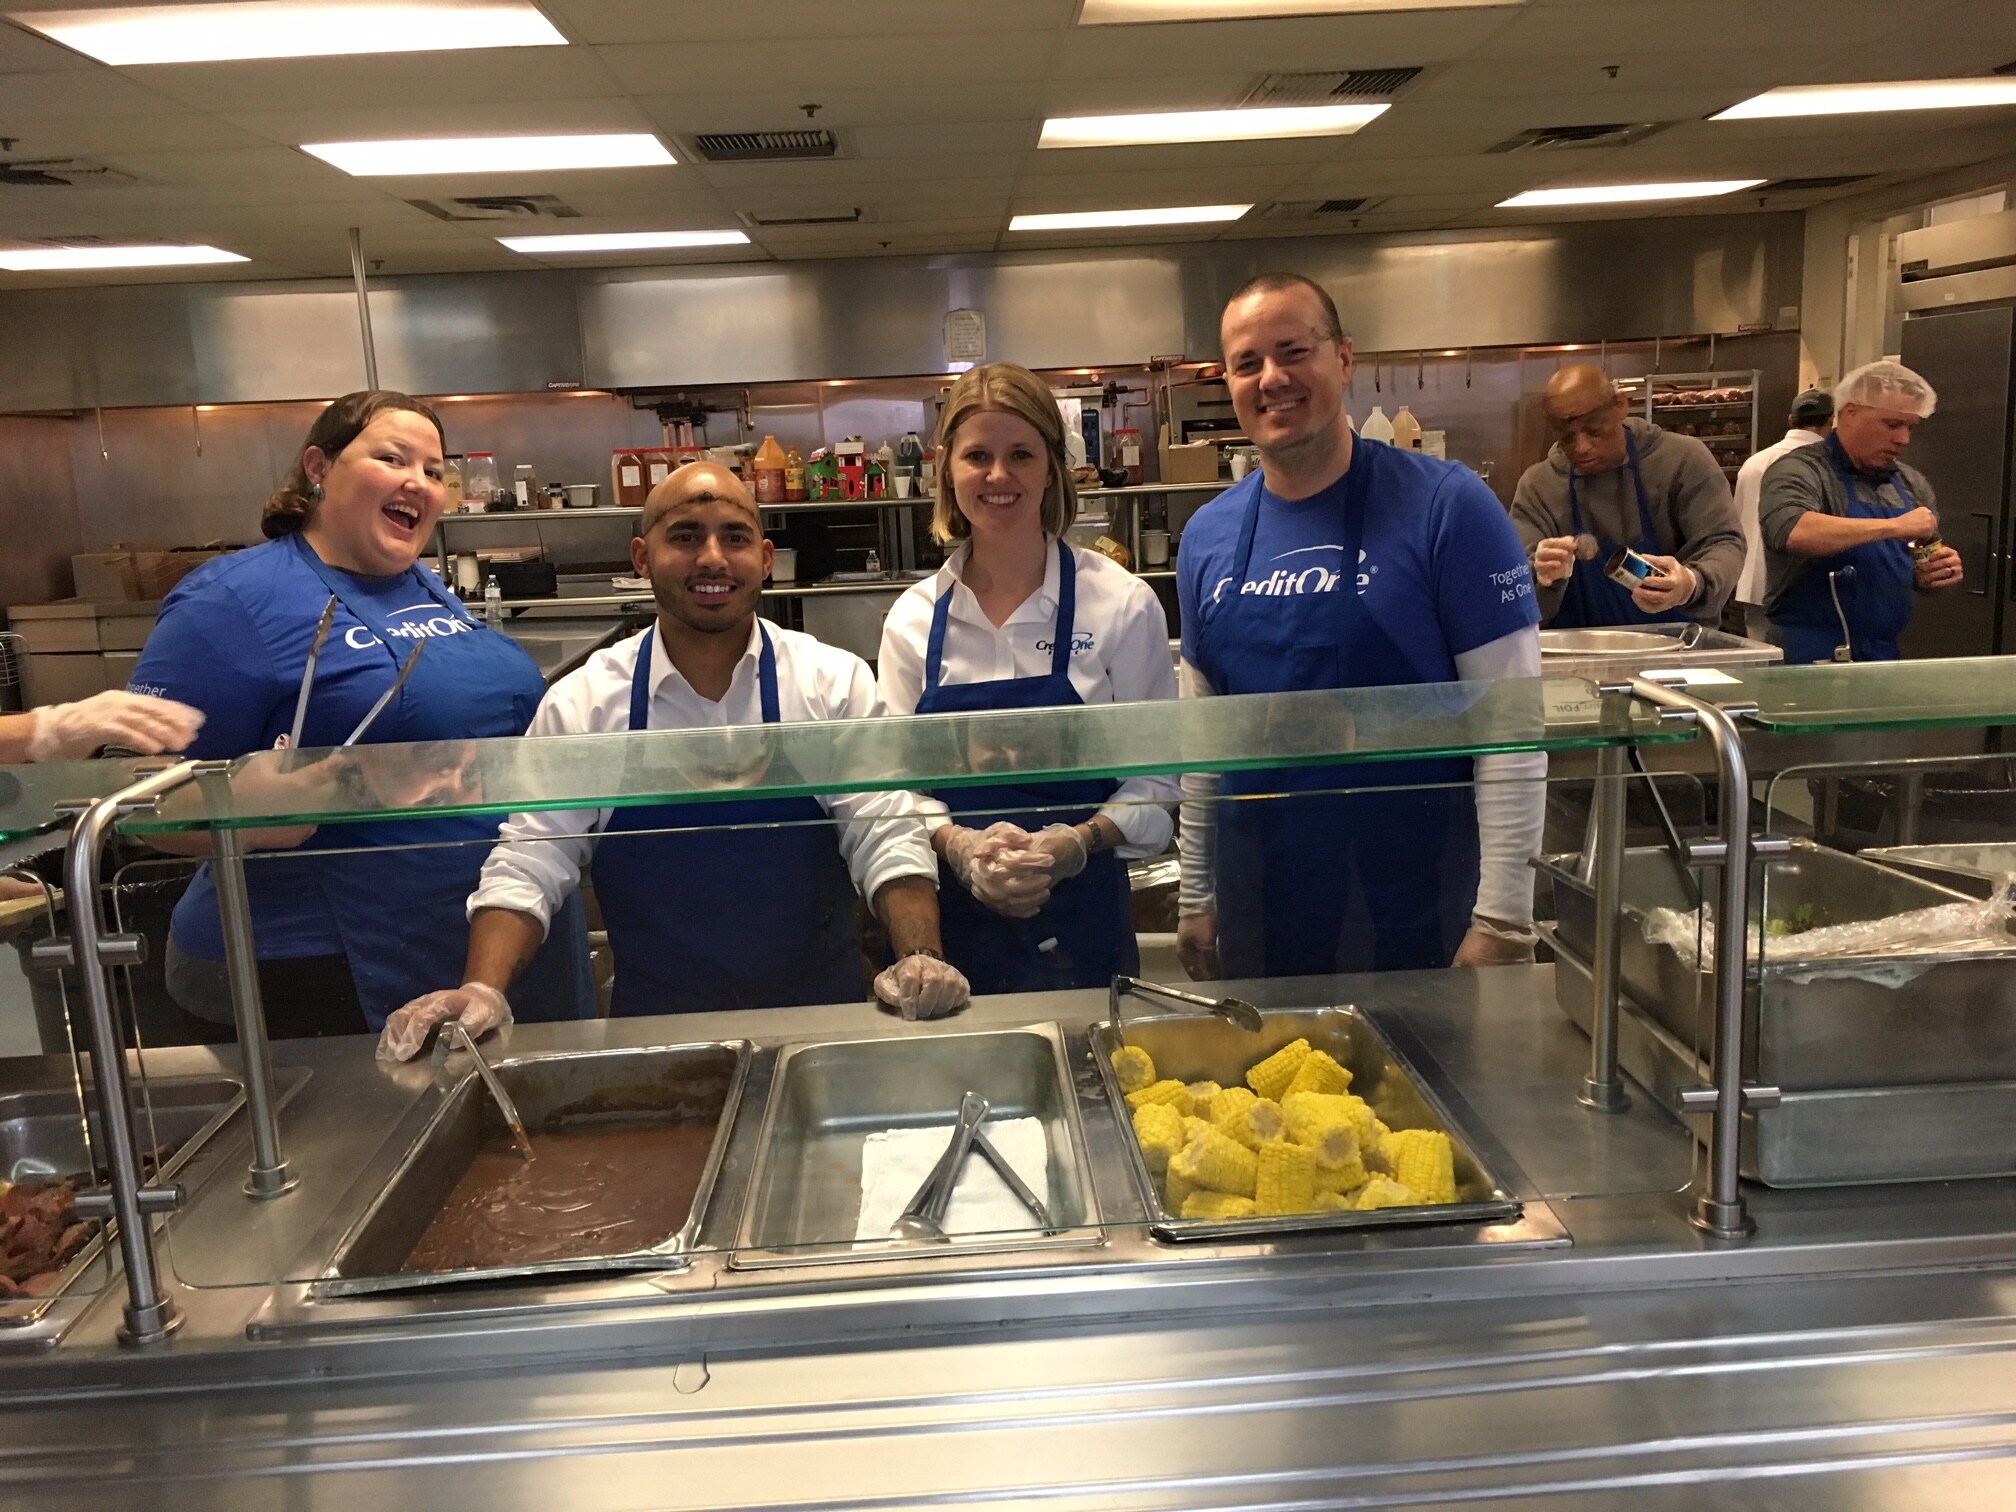 Credit One Employees Volunteer at a Soup Kitchen in the Community